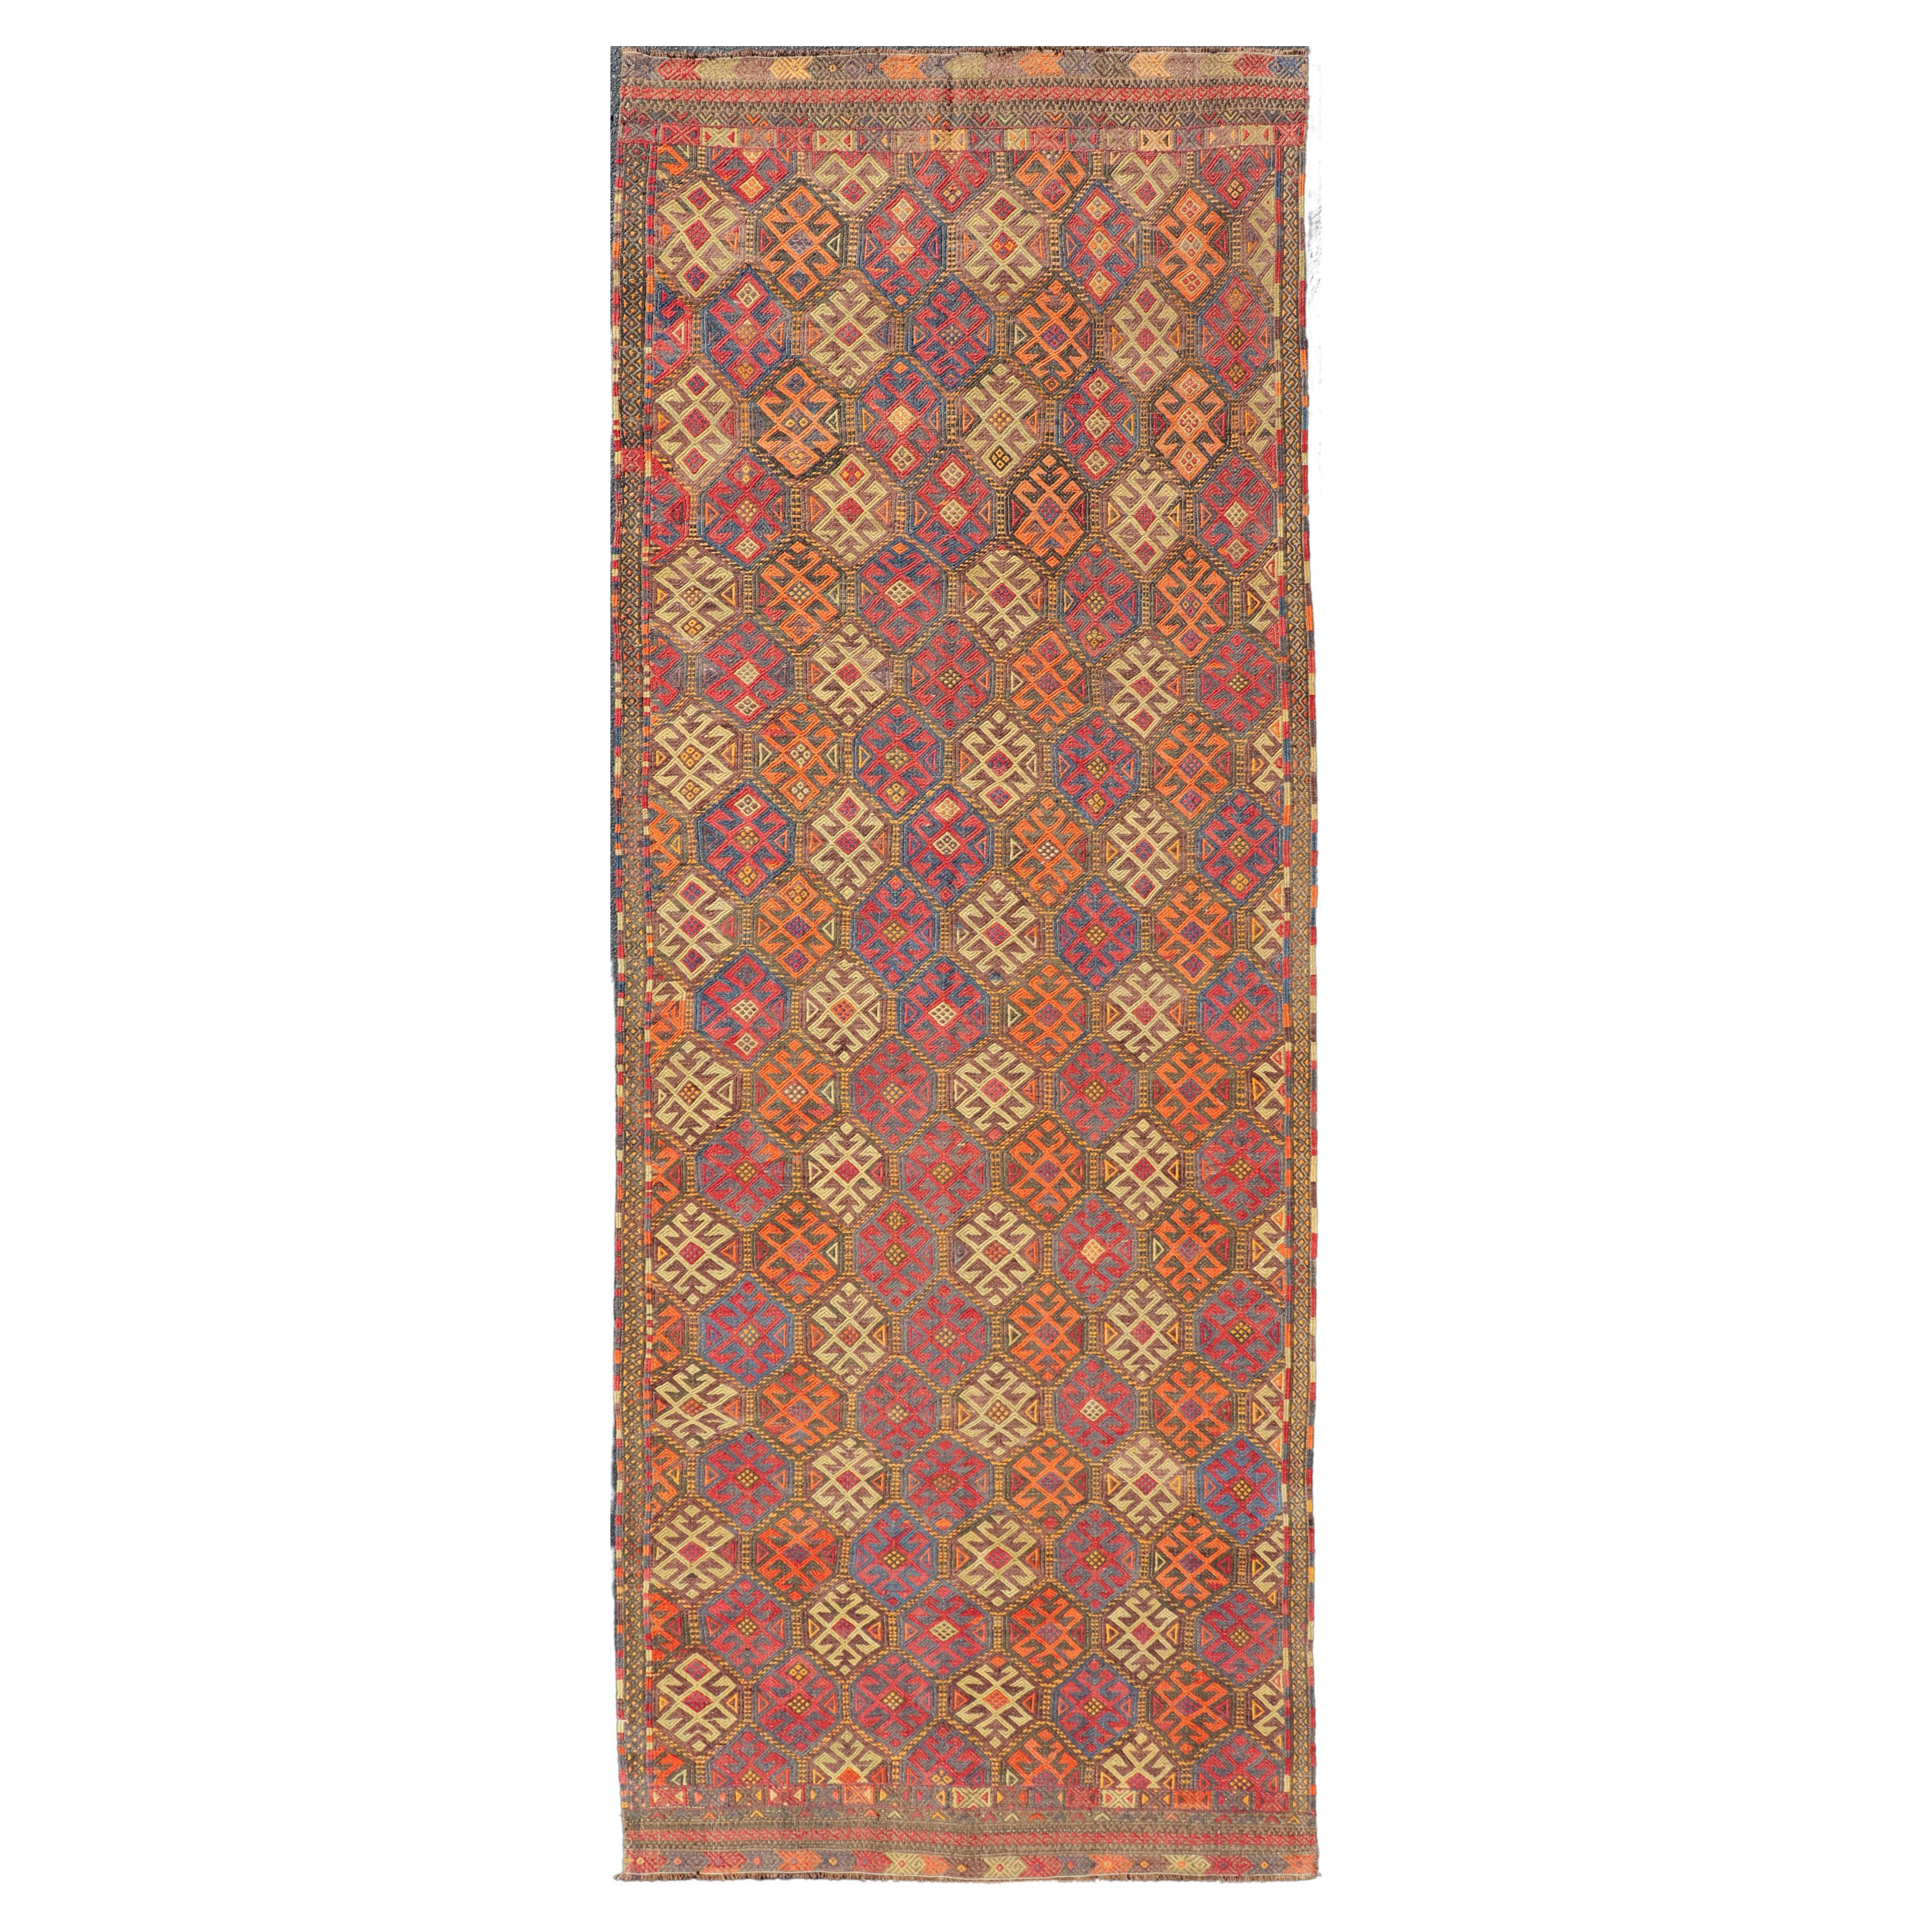 Vintage Turkish Embroidered Gallery Kilim Runner with All-Over Design